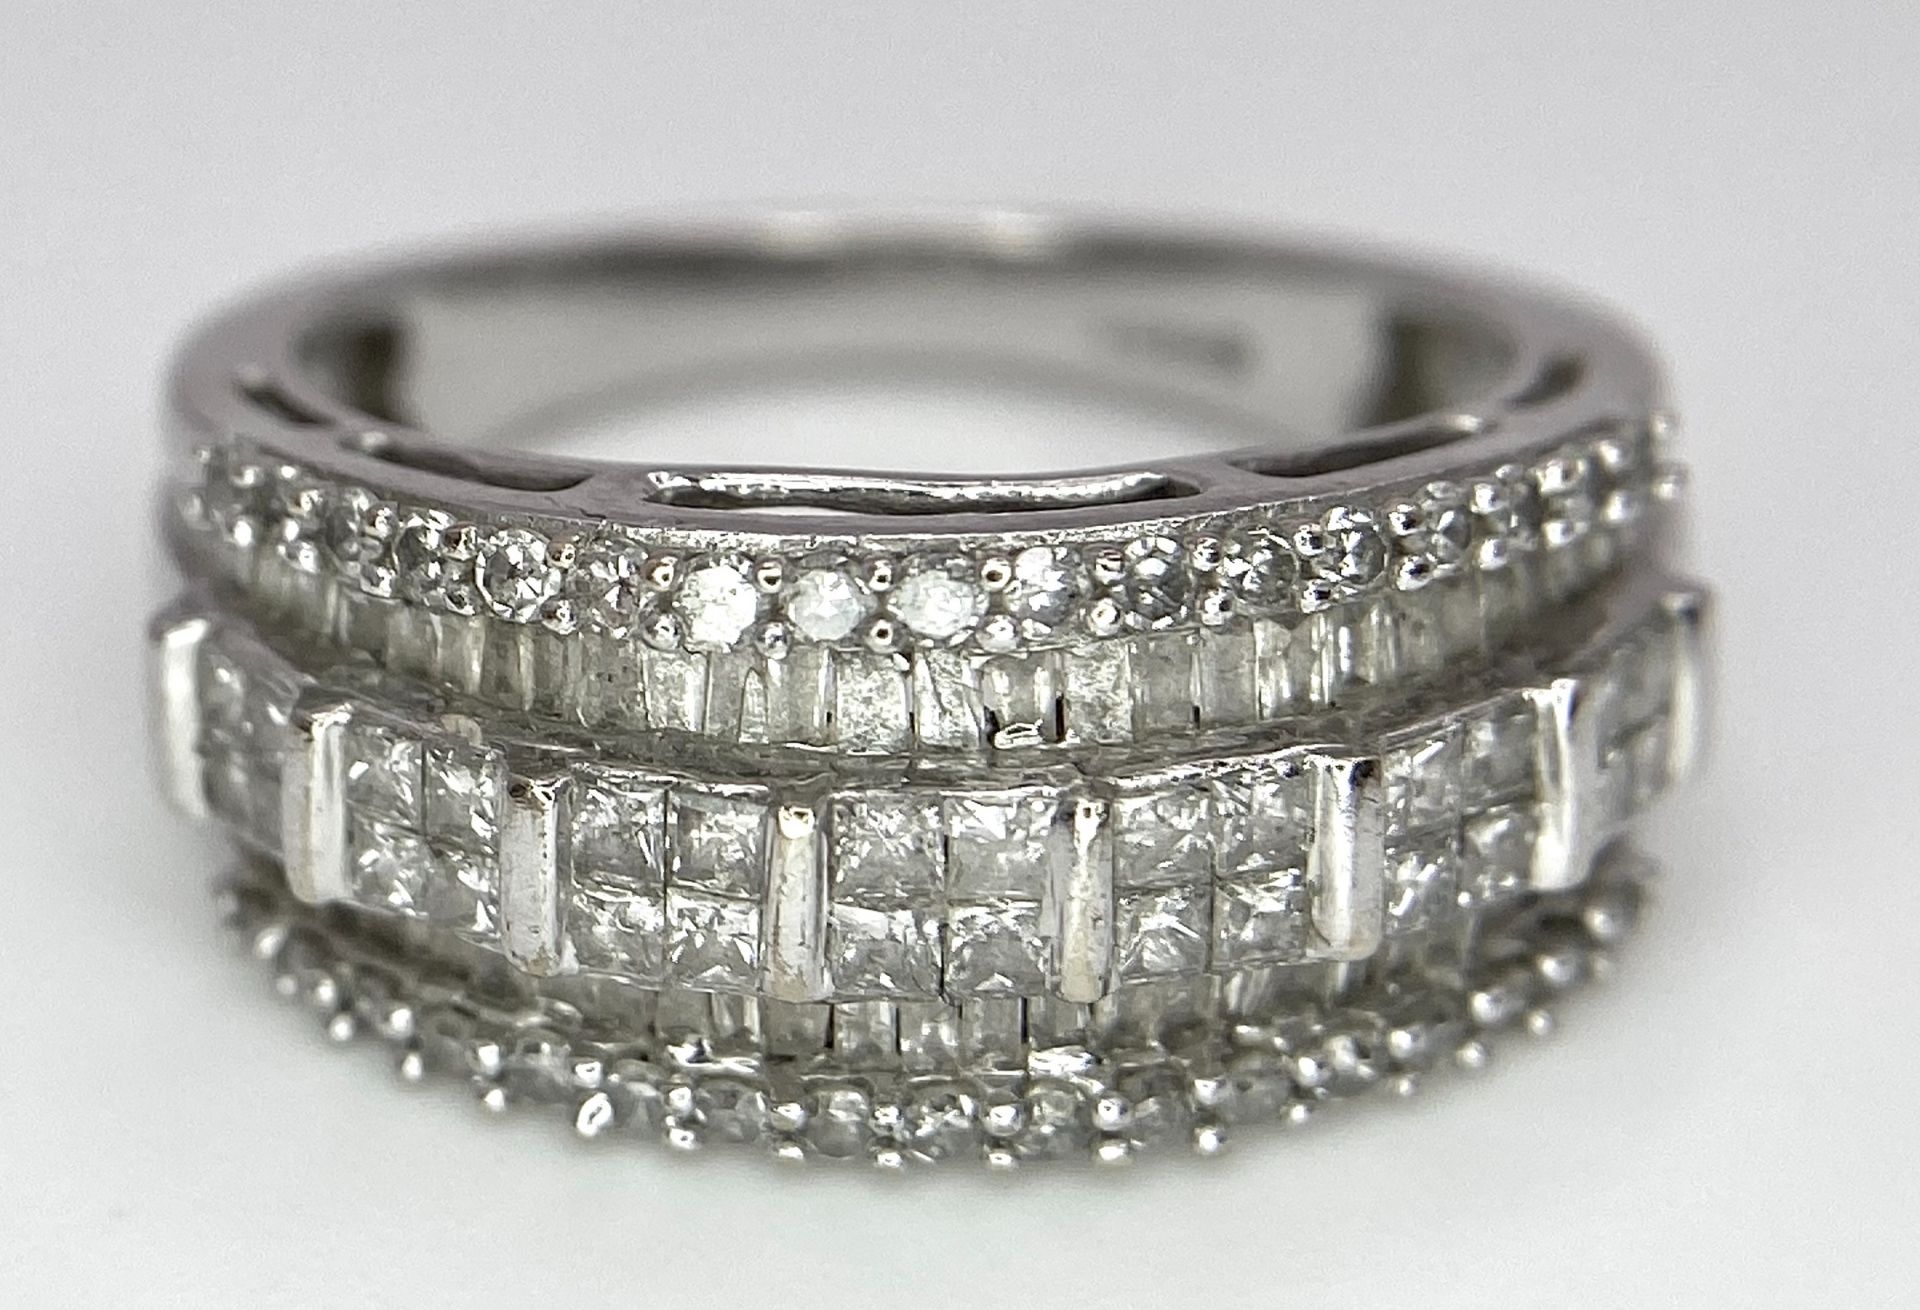 A 9K White Gold Mixed Cut Diamond Ring. Five rows of, square, round and baguette cut diamonds. - Image 4 of 7